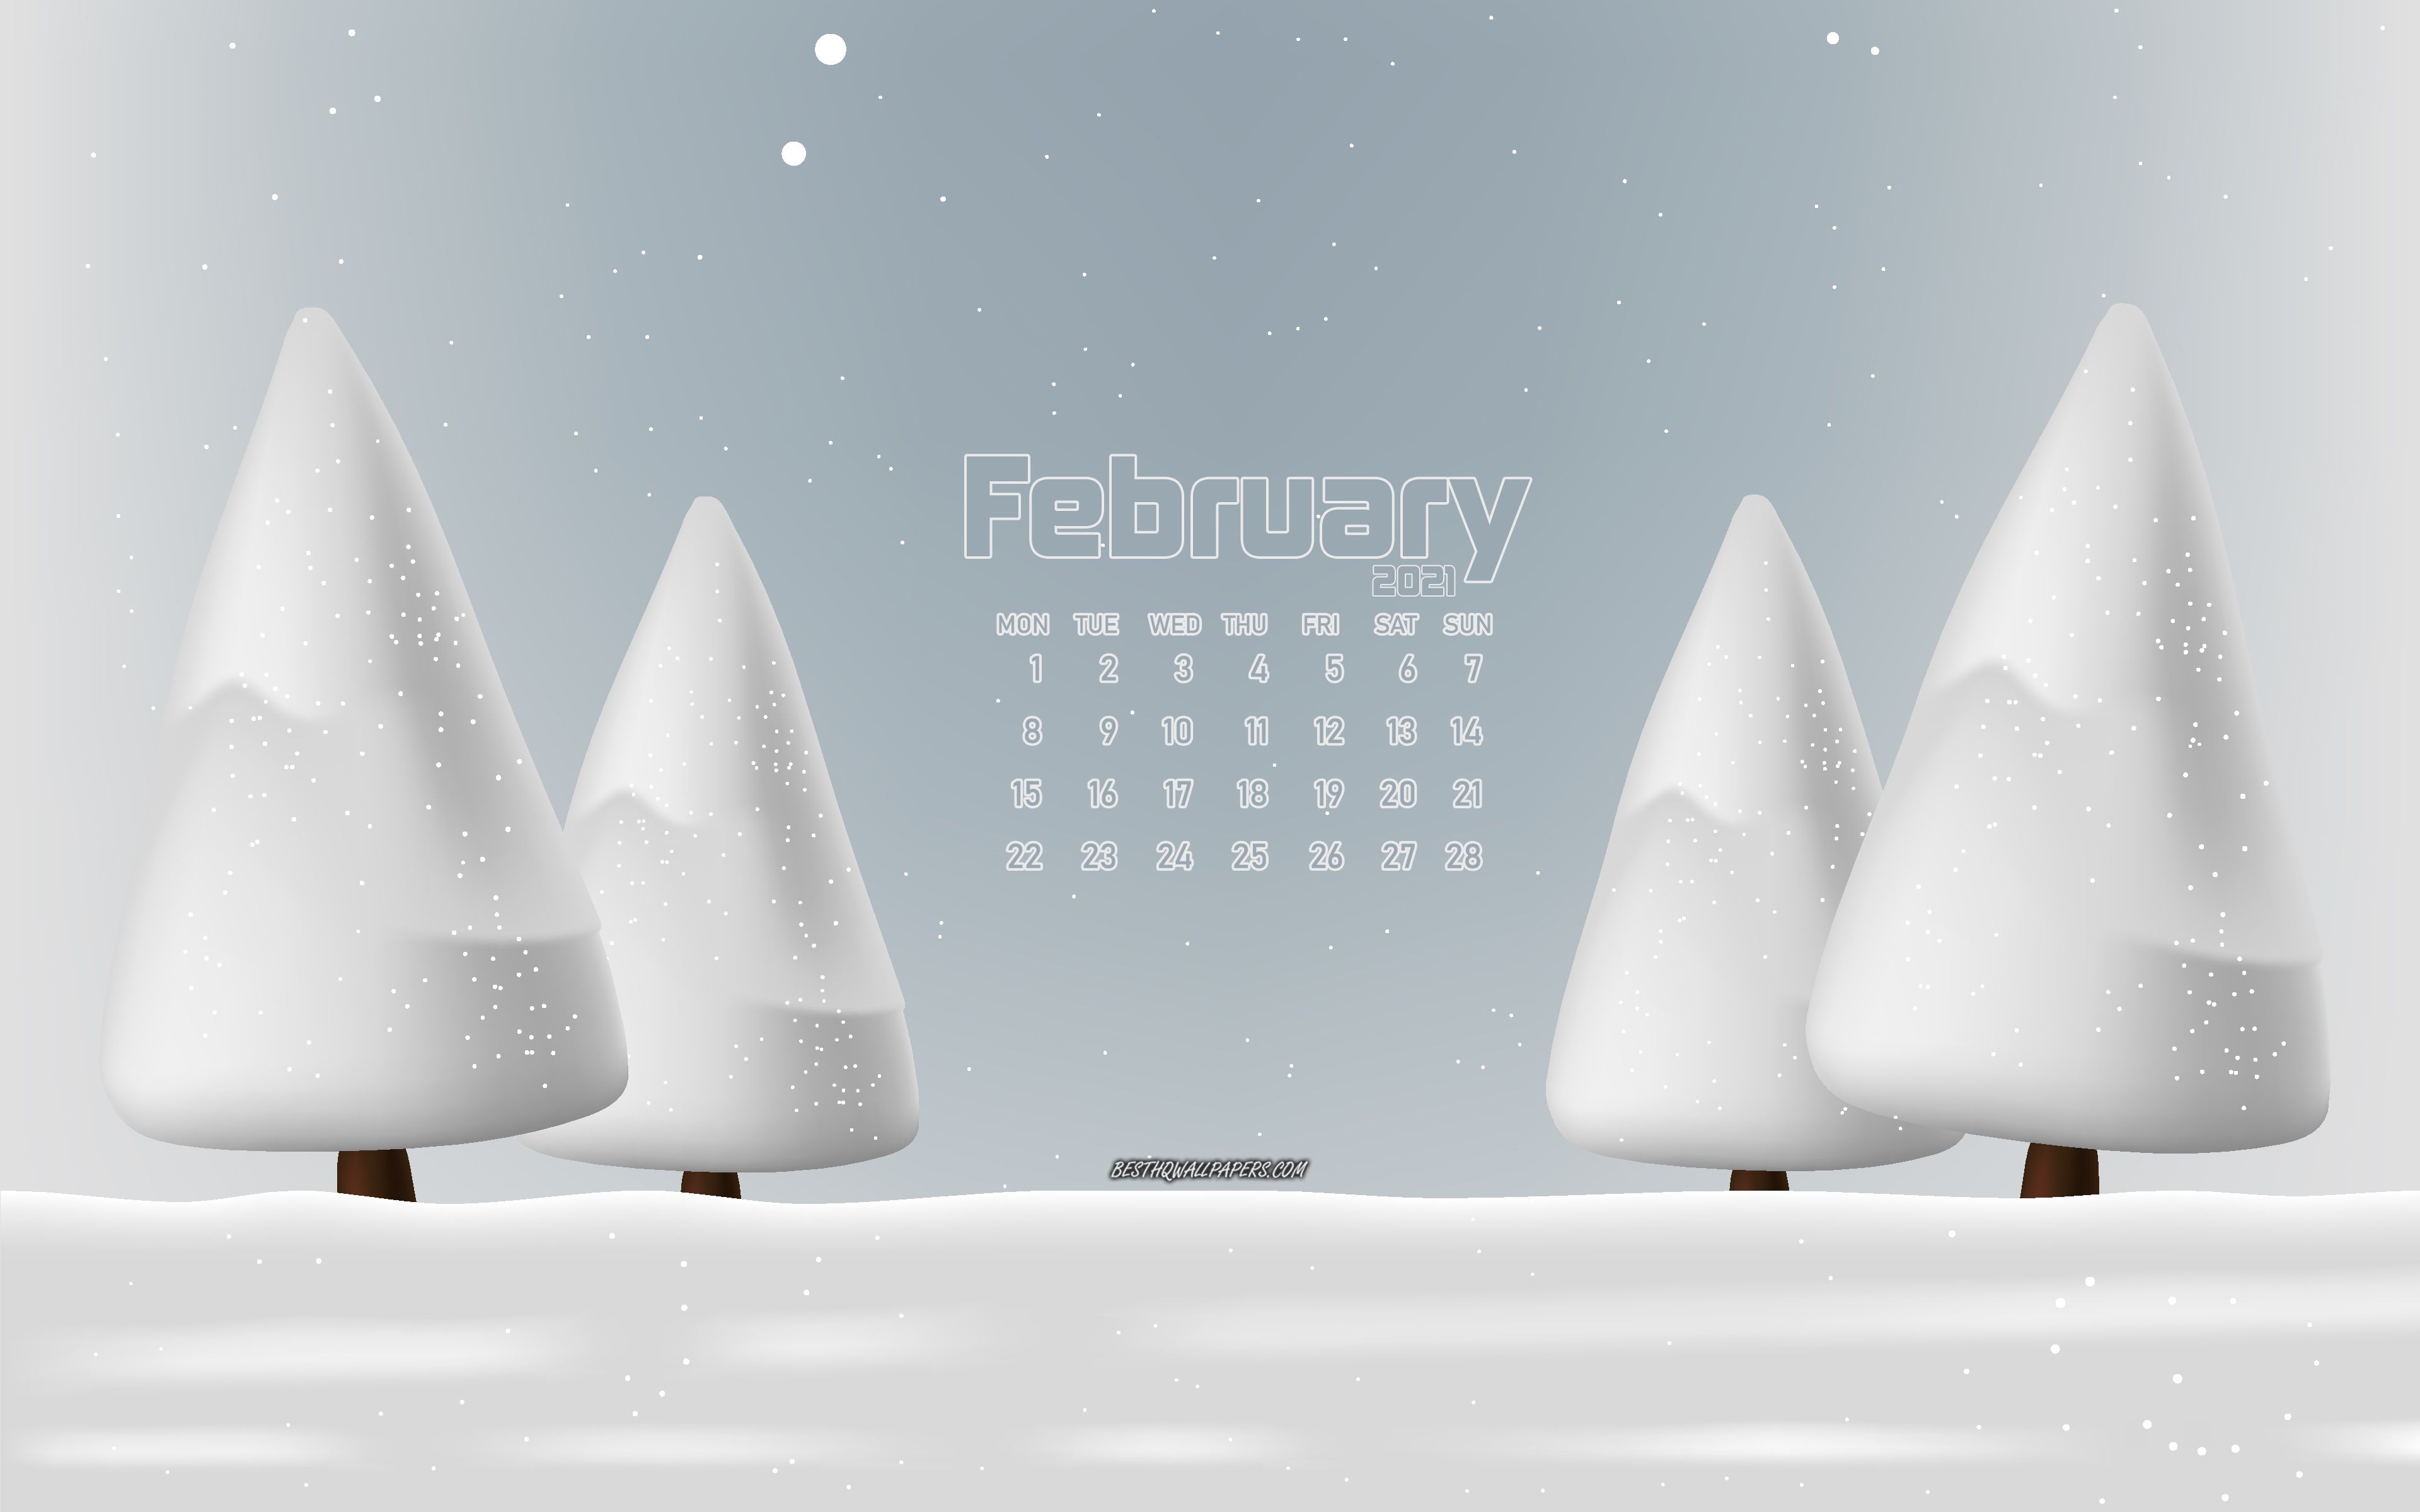 Download wallpaper 2021 February calendar, 4k, winter landscape, winter, snow, 2021 calendars, February, 2021 New Year, February 2021 Calendar for desktop with resolution 3840x2400. High Quality HD picture wallpaper